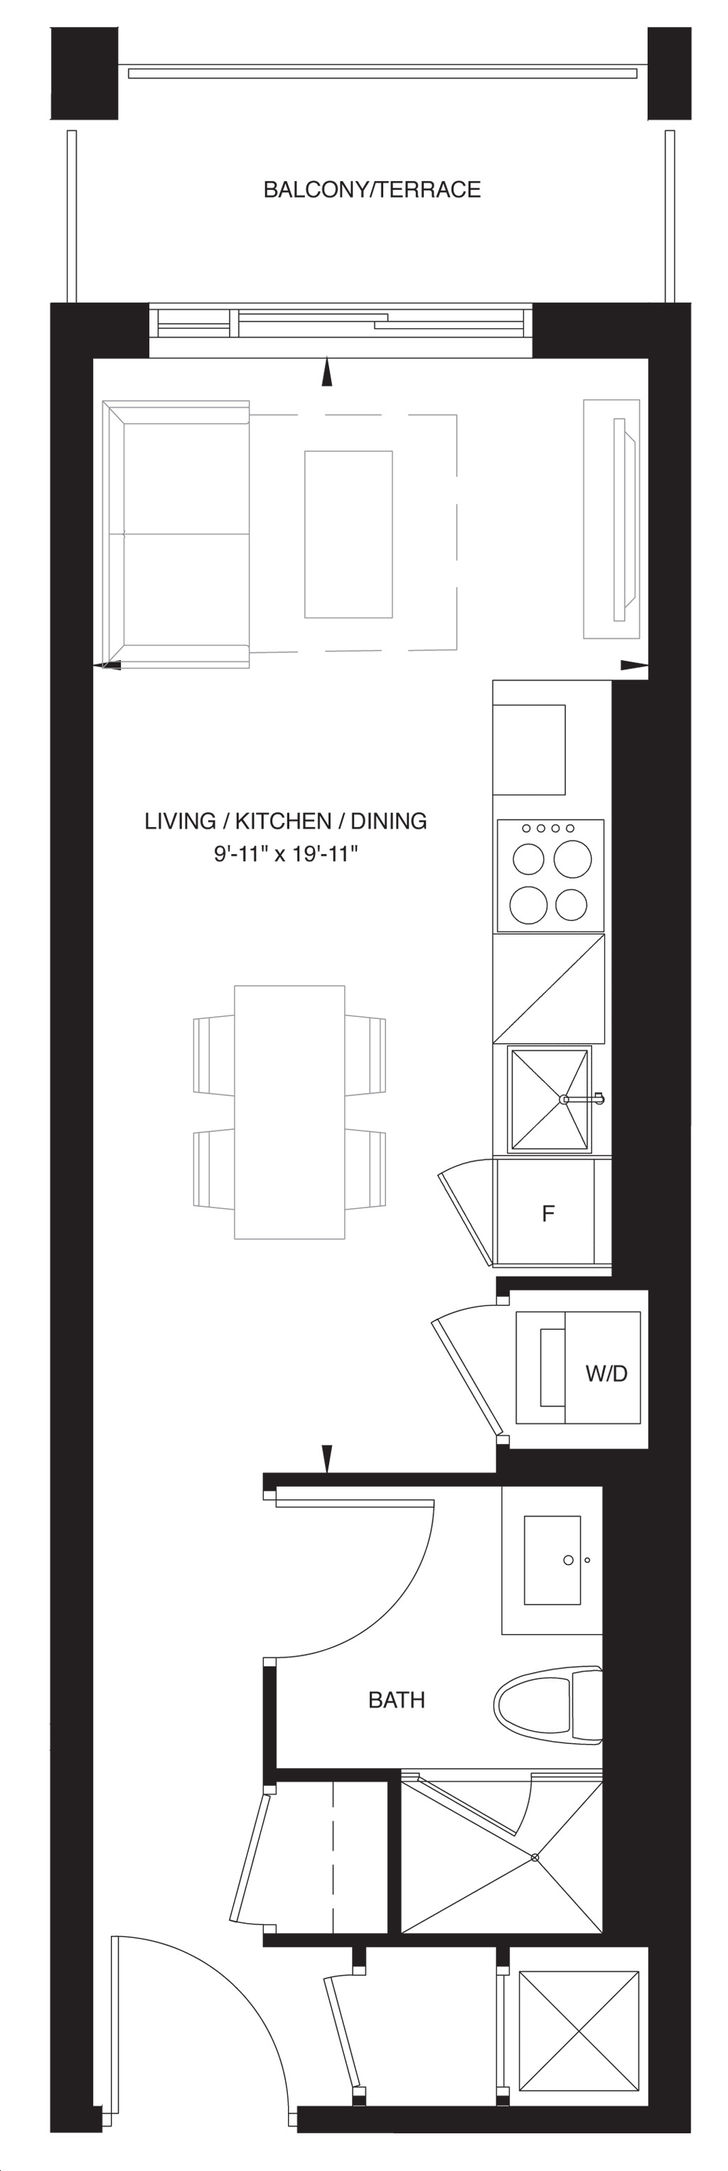 The Forest Hill Condos by CentreCourt Unit SA Floorplan